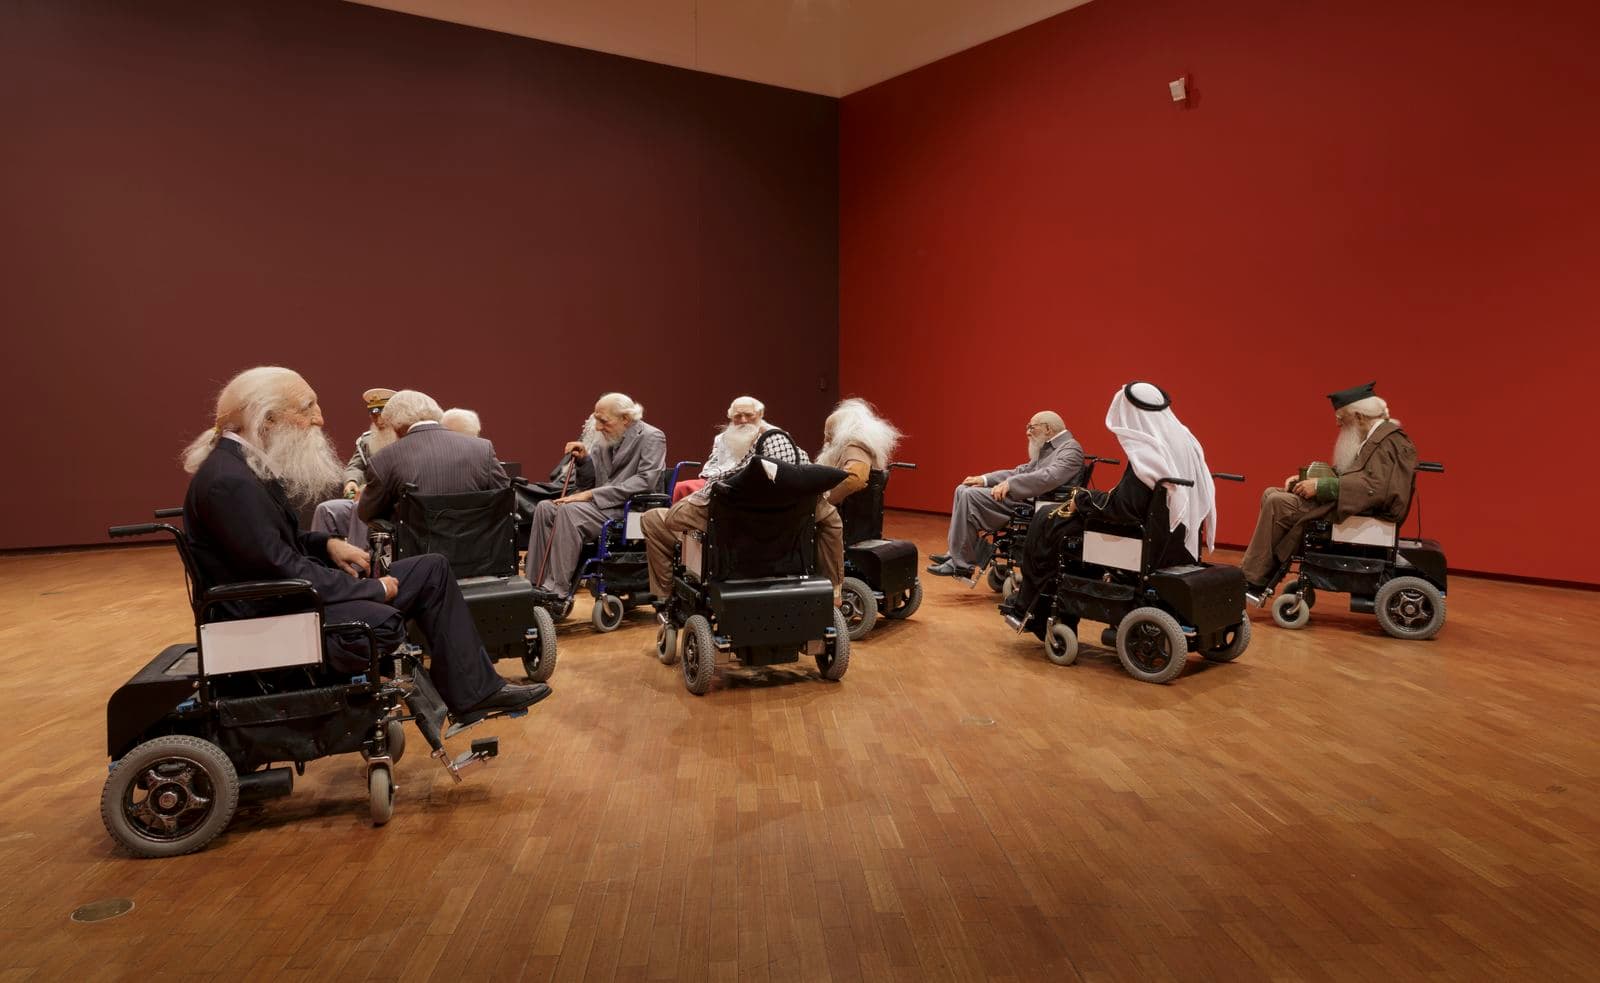 Old people's home: keep on rolling - National Gallery of Australia